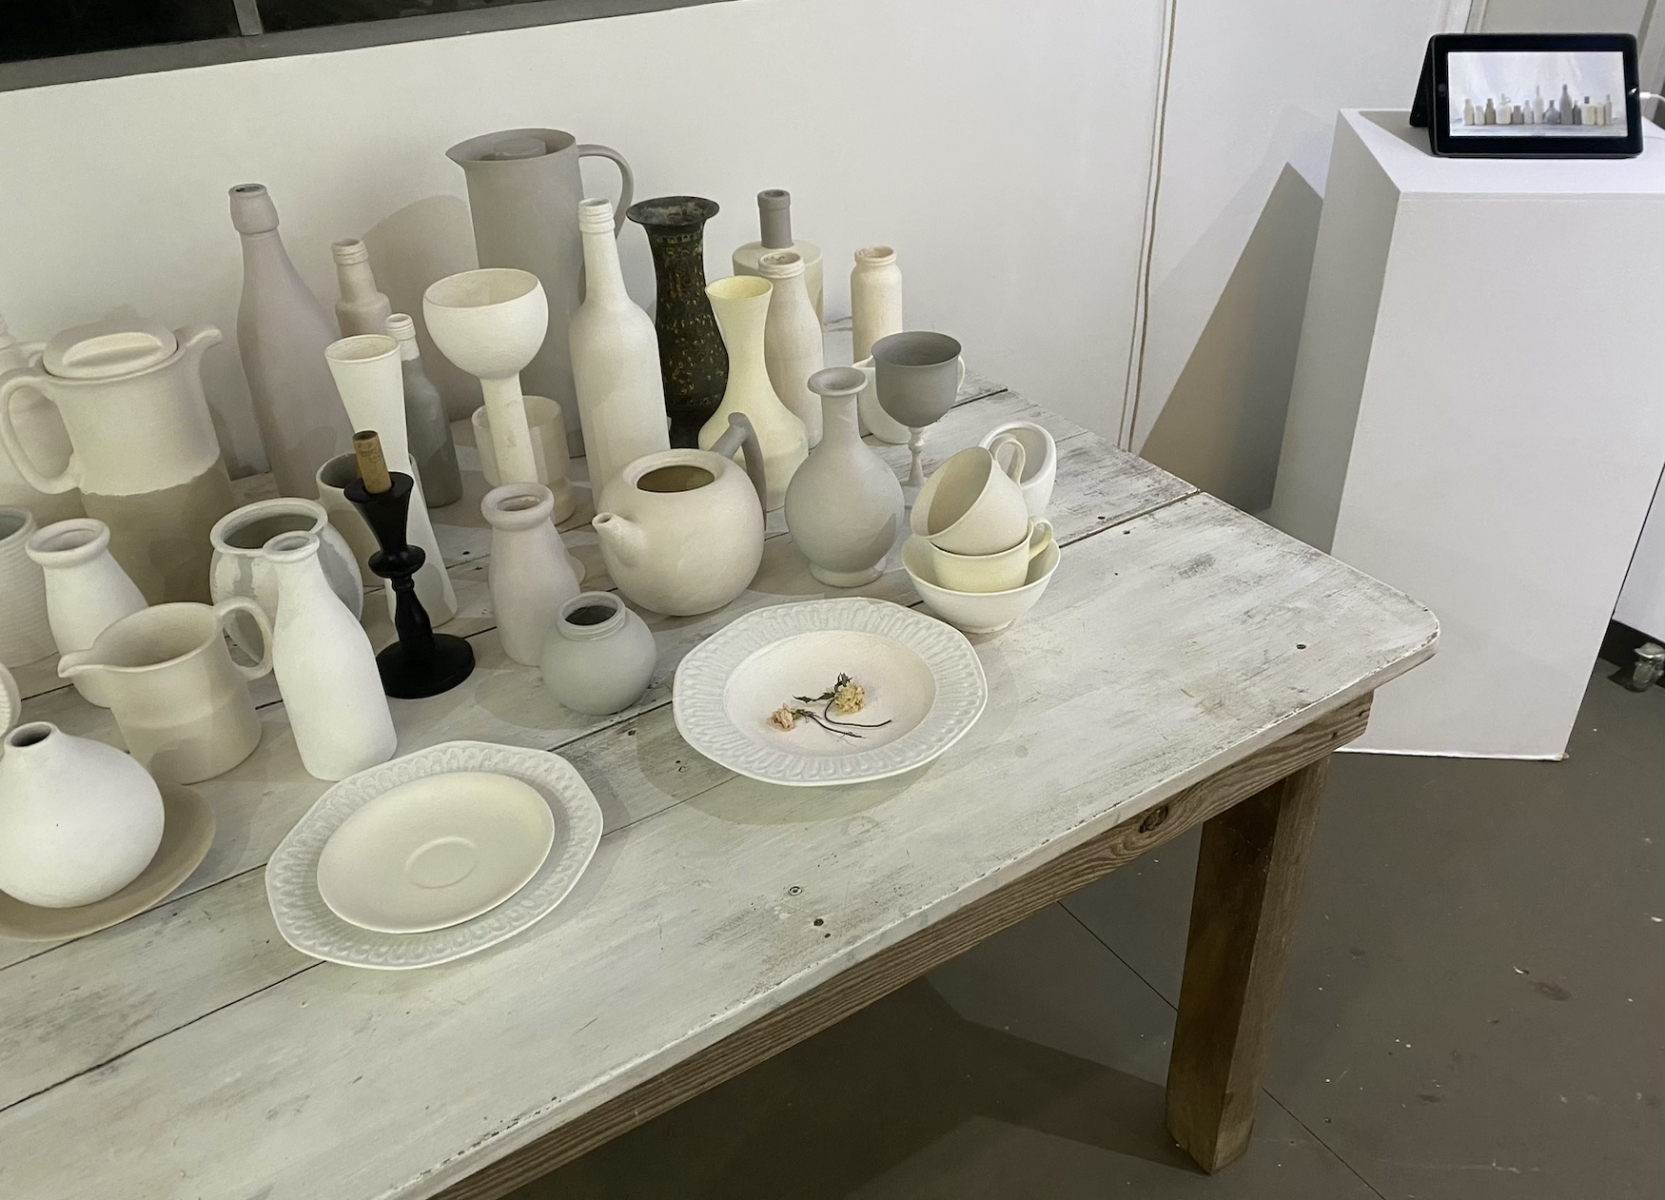 A large collection of neutral-toned pottery objects sit on a table, a video of the pottery objects runs on a tablet on a nearby plinth